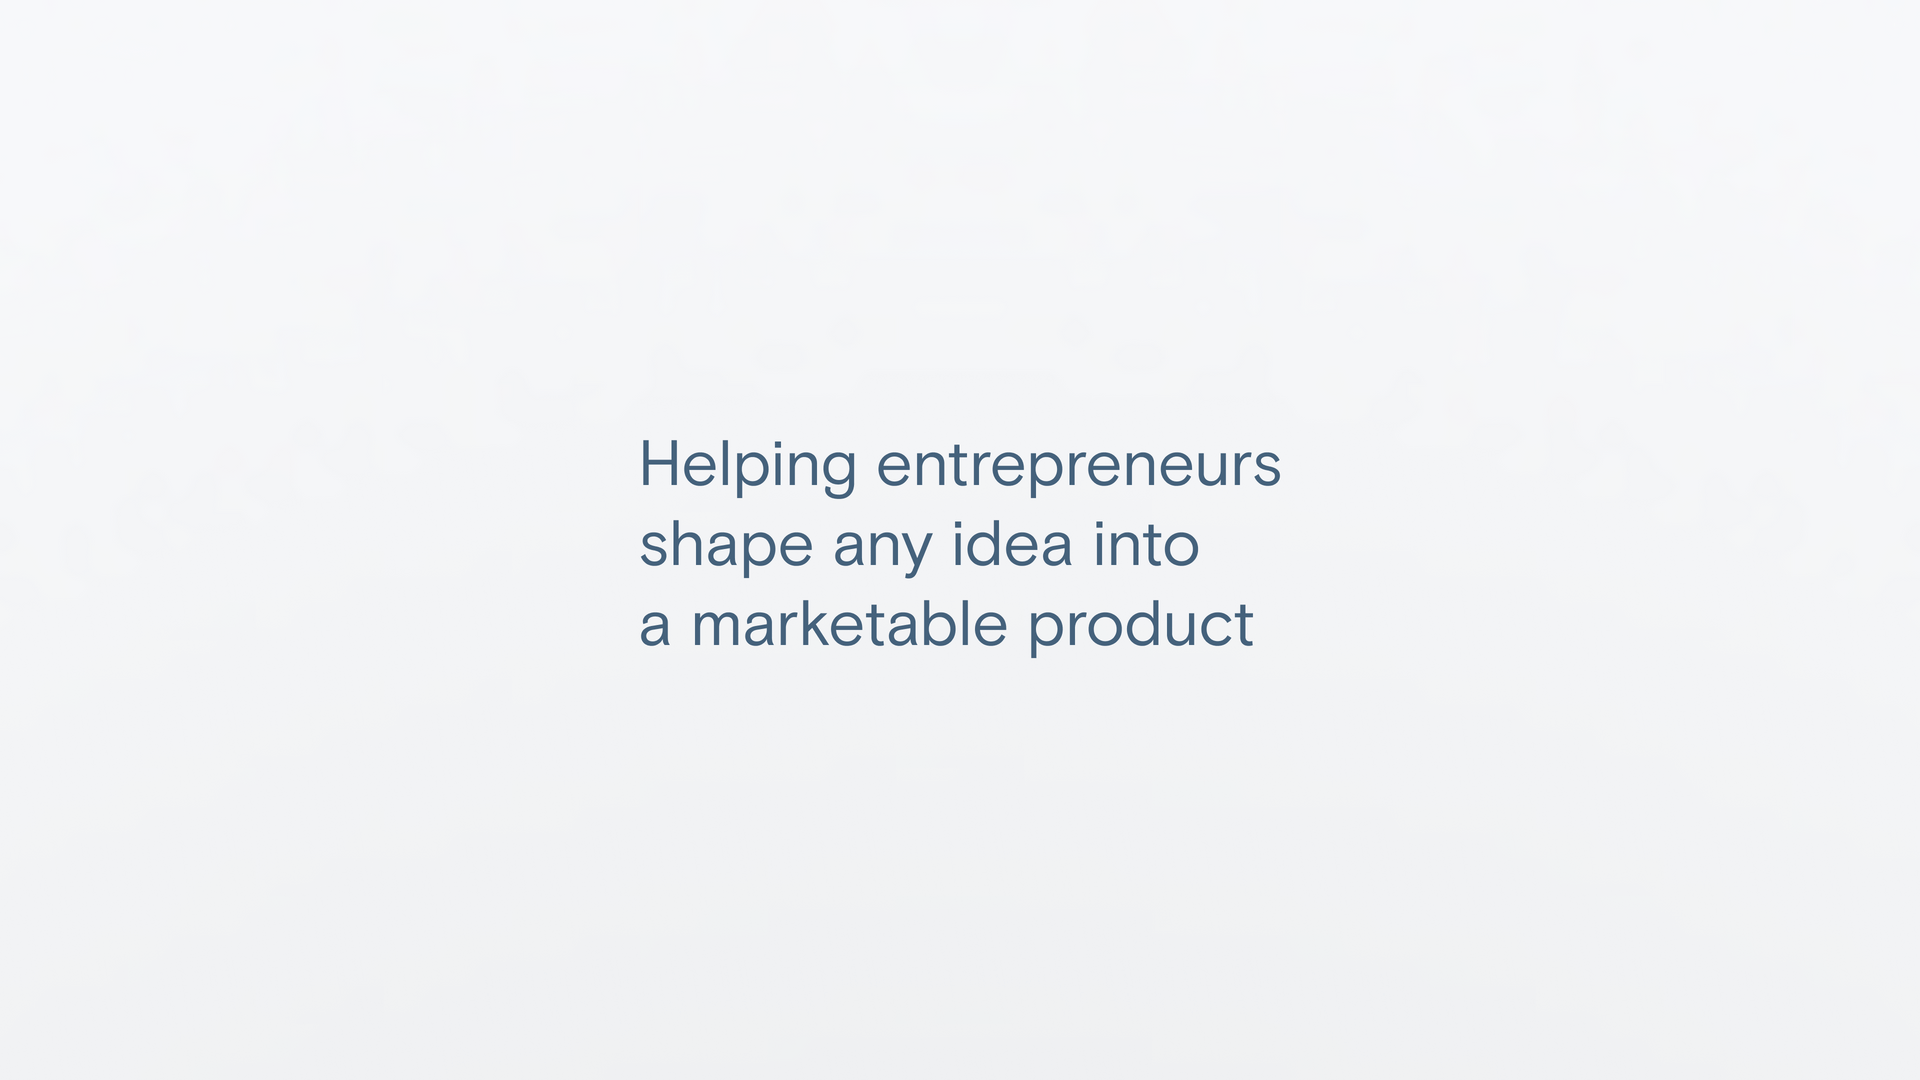 We help entrepreneurs design and build products from scratch